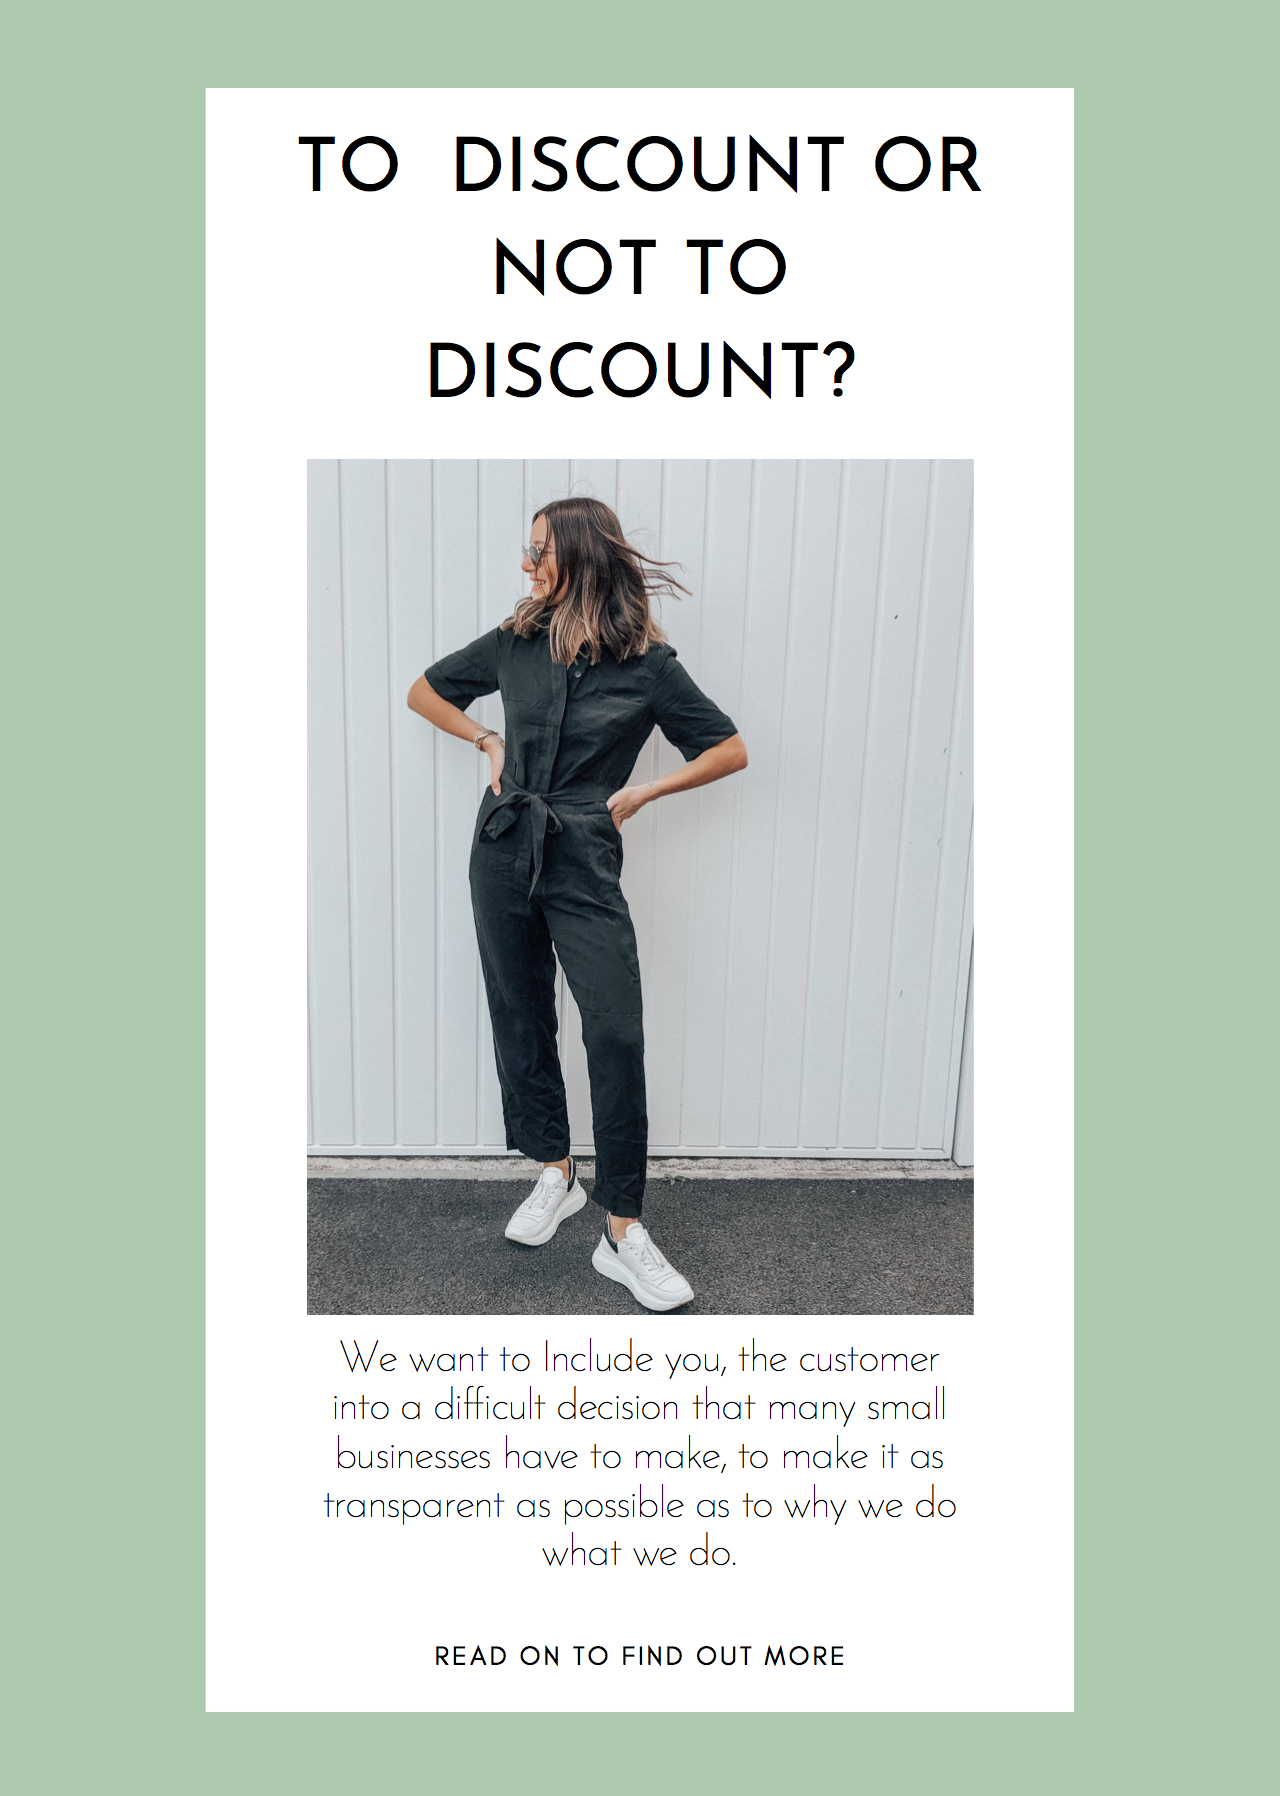 To  discount or not to discount?